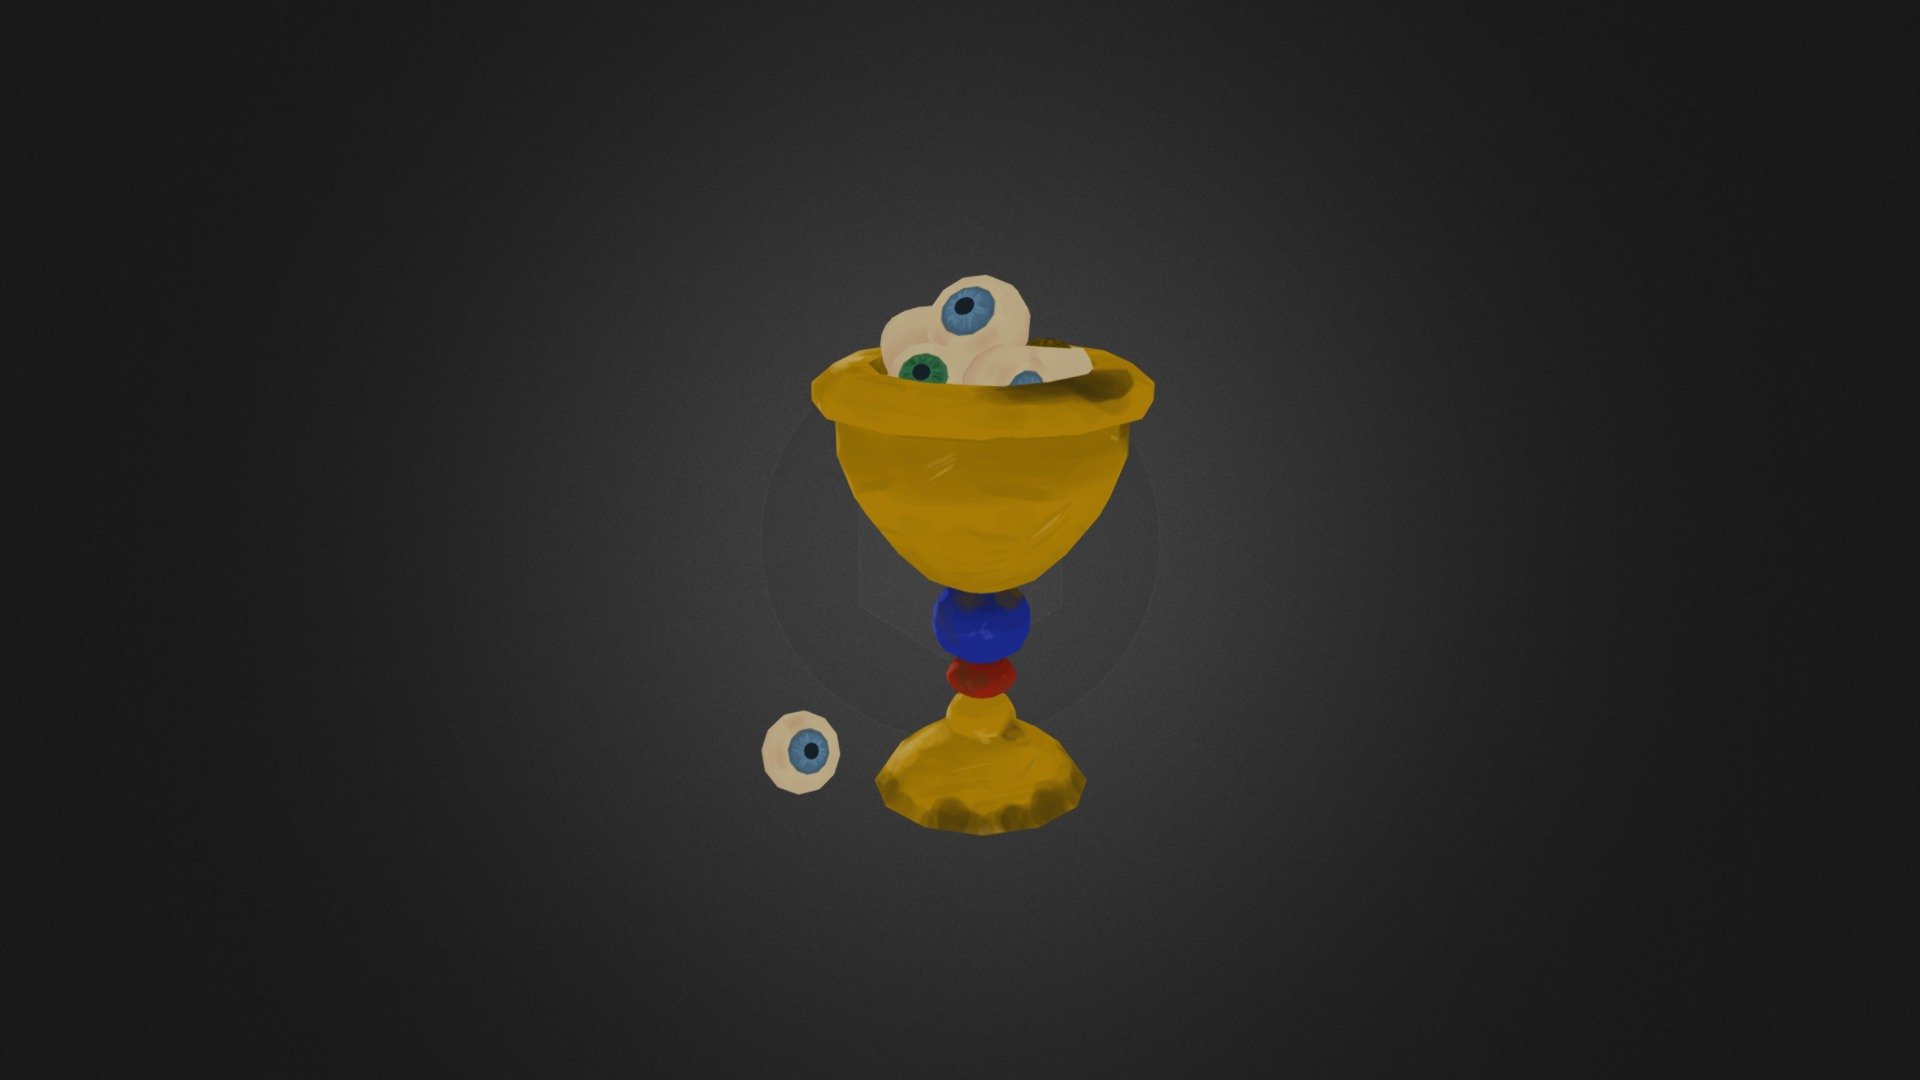 Goblet with Eyes